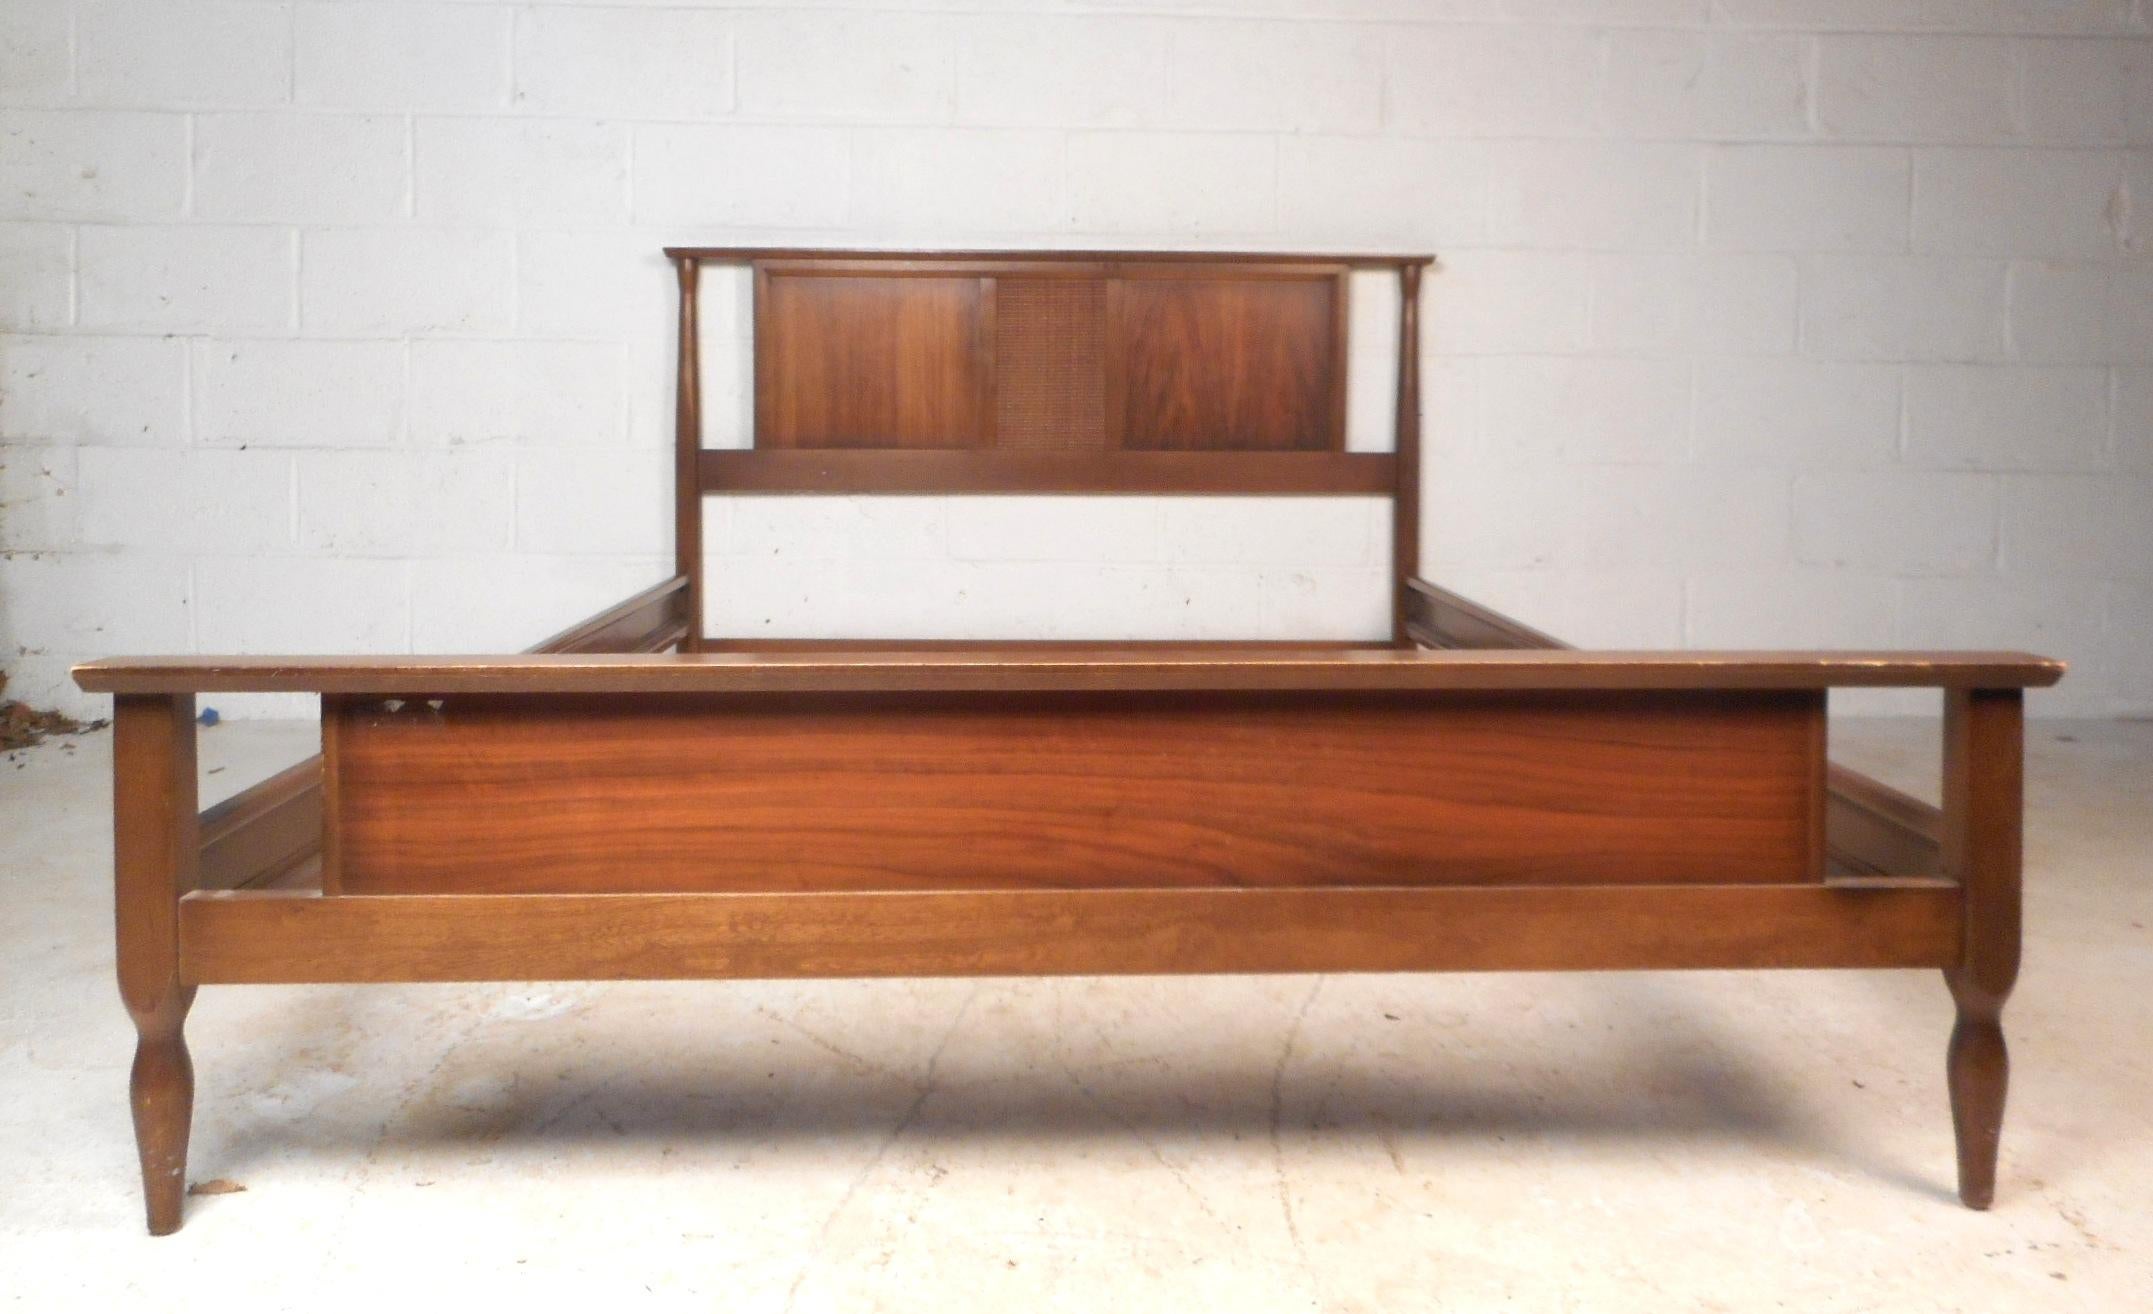 This beautiful vintage modern headboard and footboard comes with metal side rails. A sleek design with beveled edges, a woven style center, and tapered sides. This wonderful bed frame is well made and has an elegant vintage walnut finish throughout.